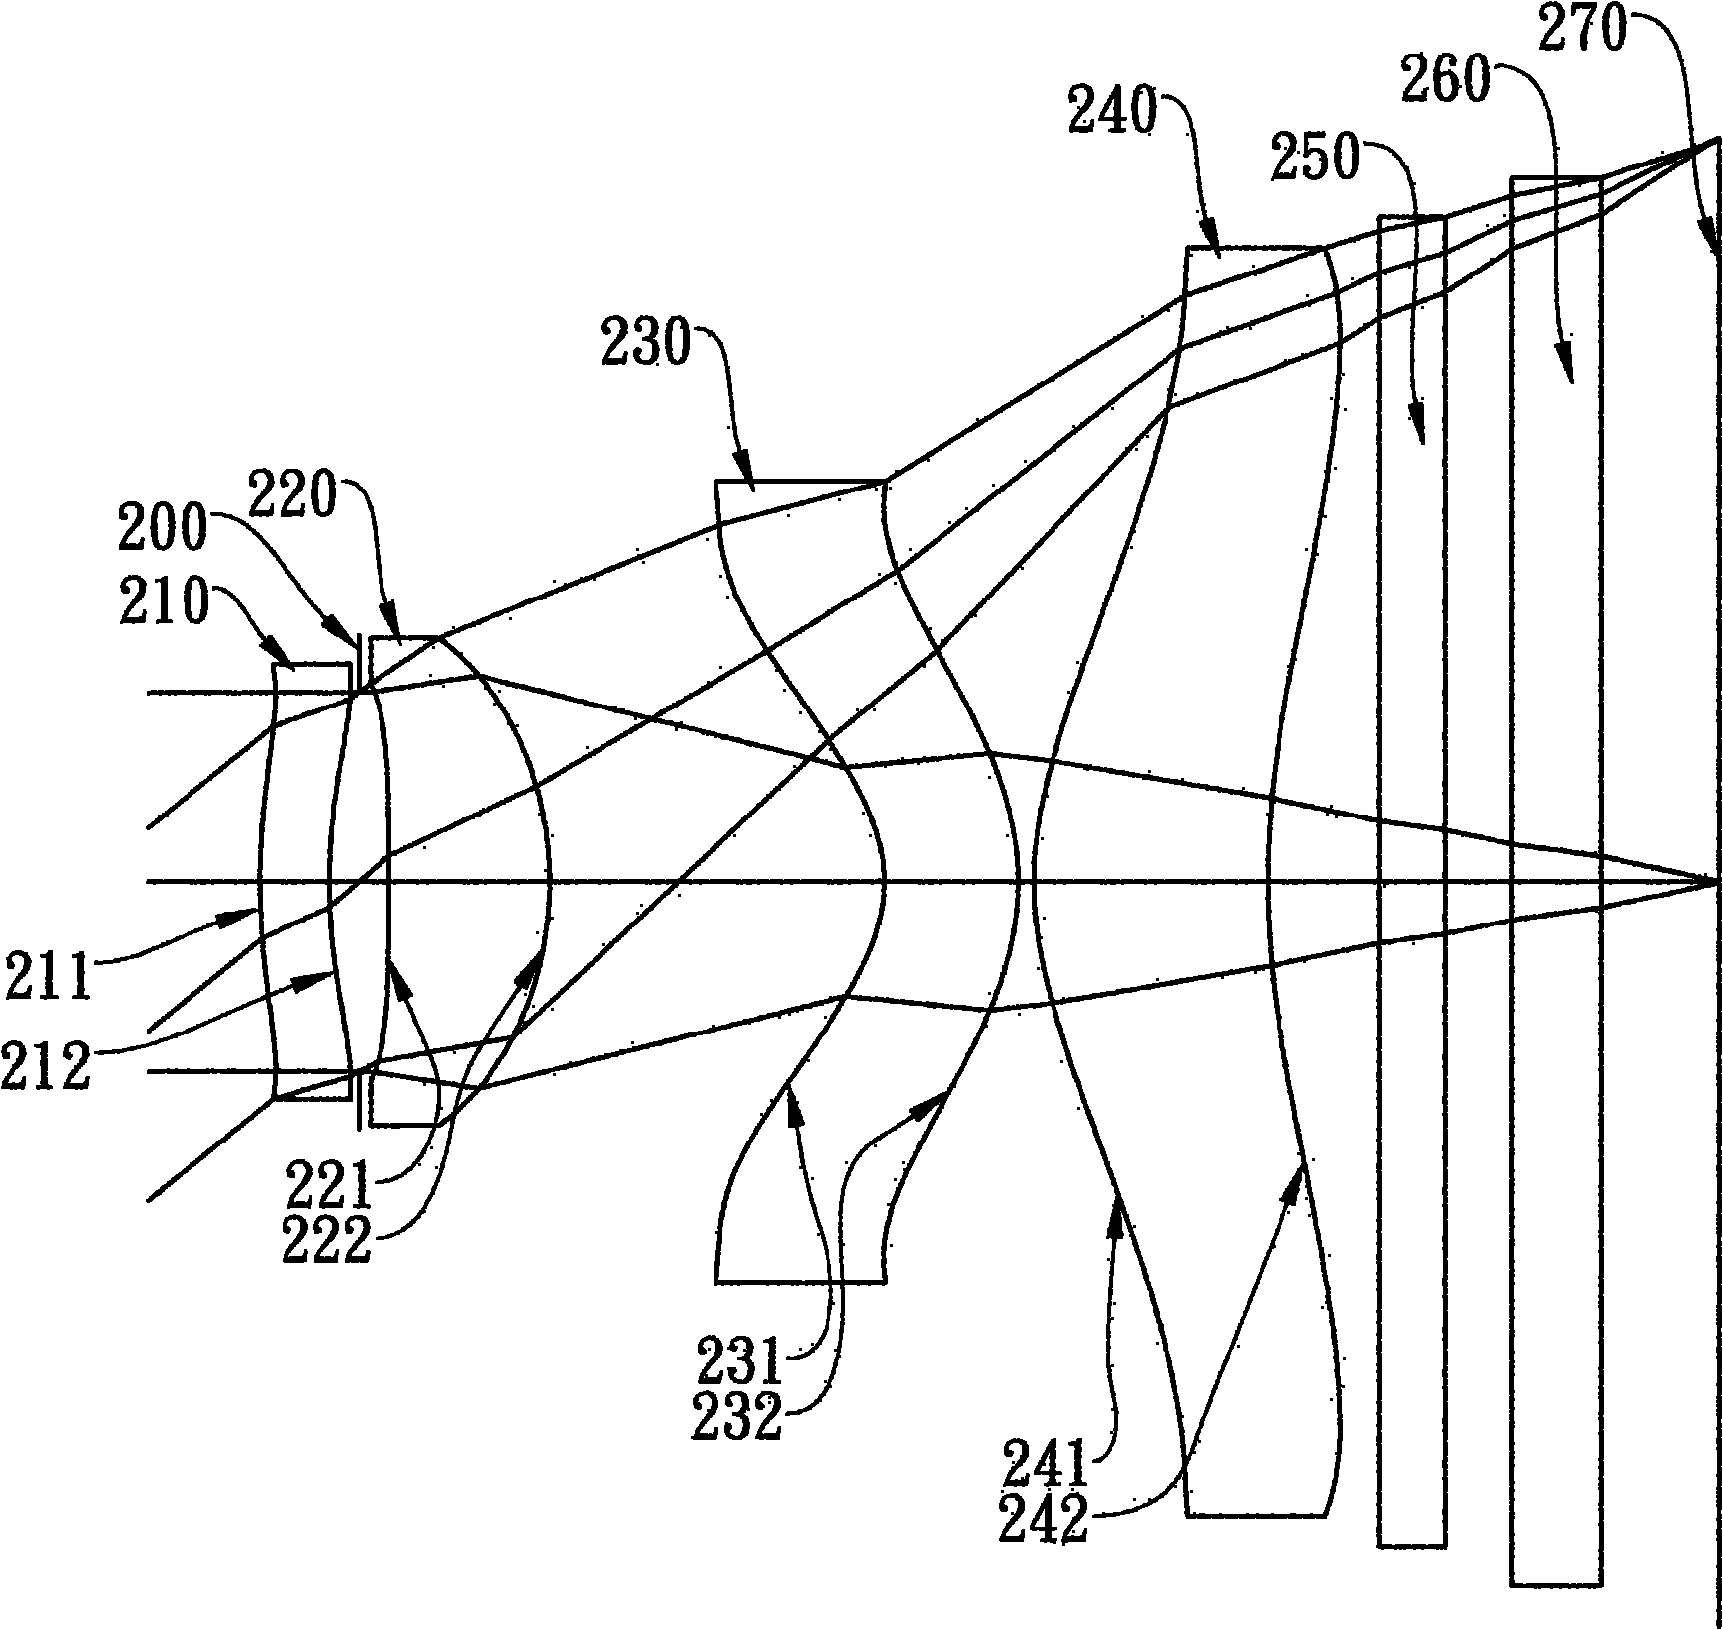 Optical photographic system